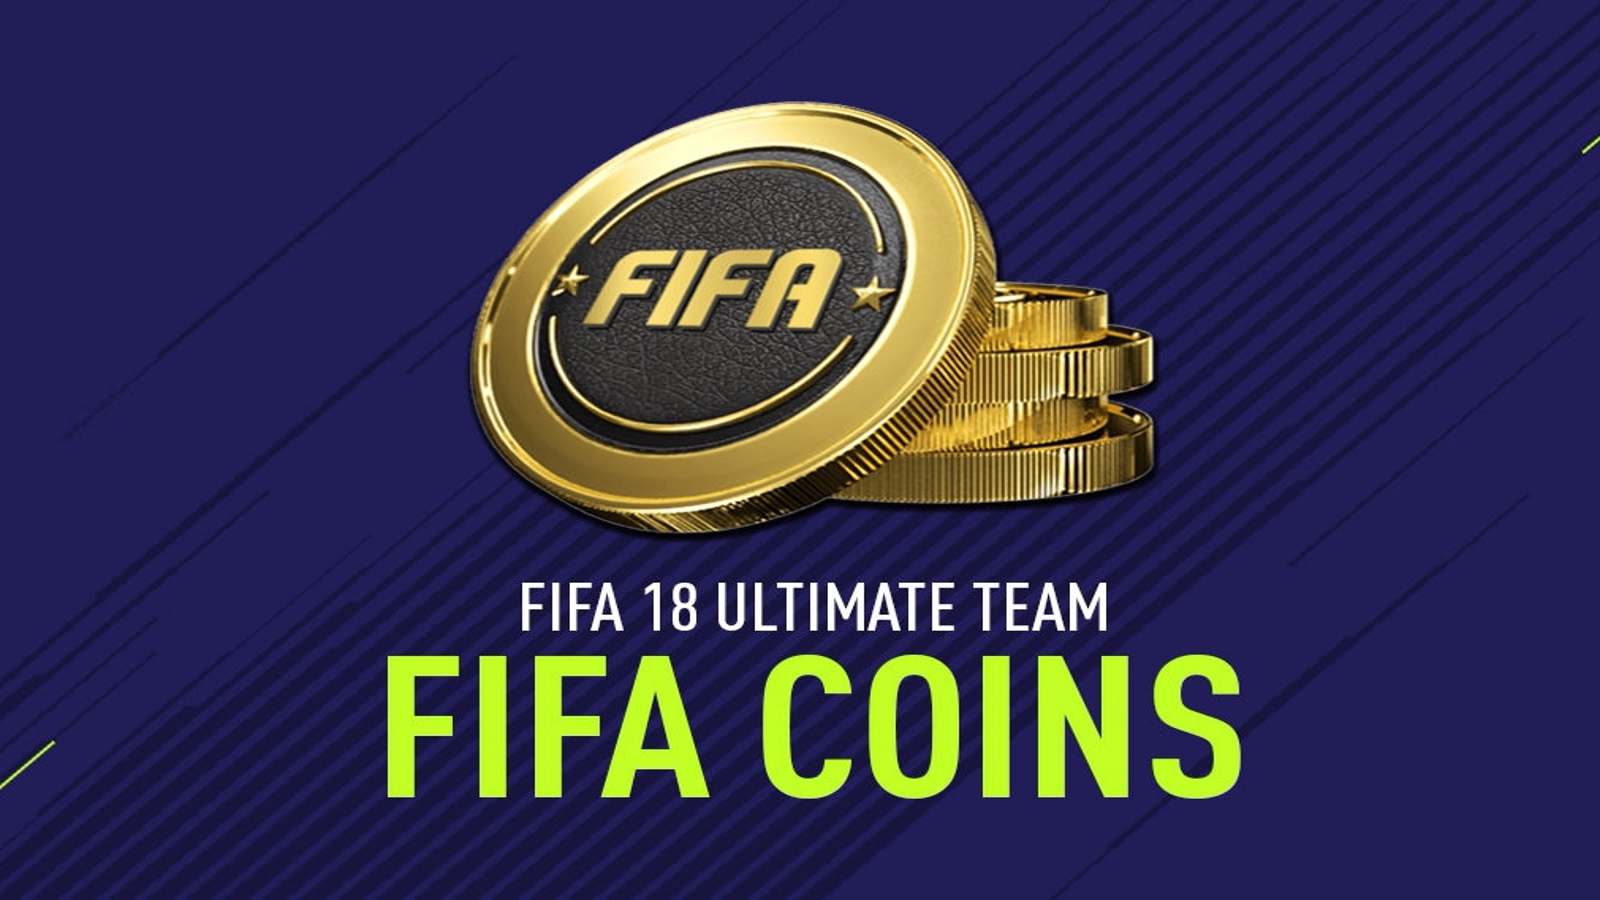 FIFA 18 Web App: What is Ultimate Team, where can I find it and